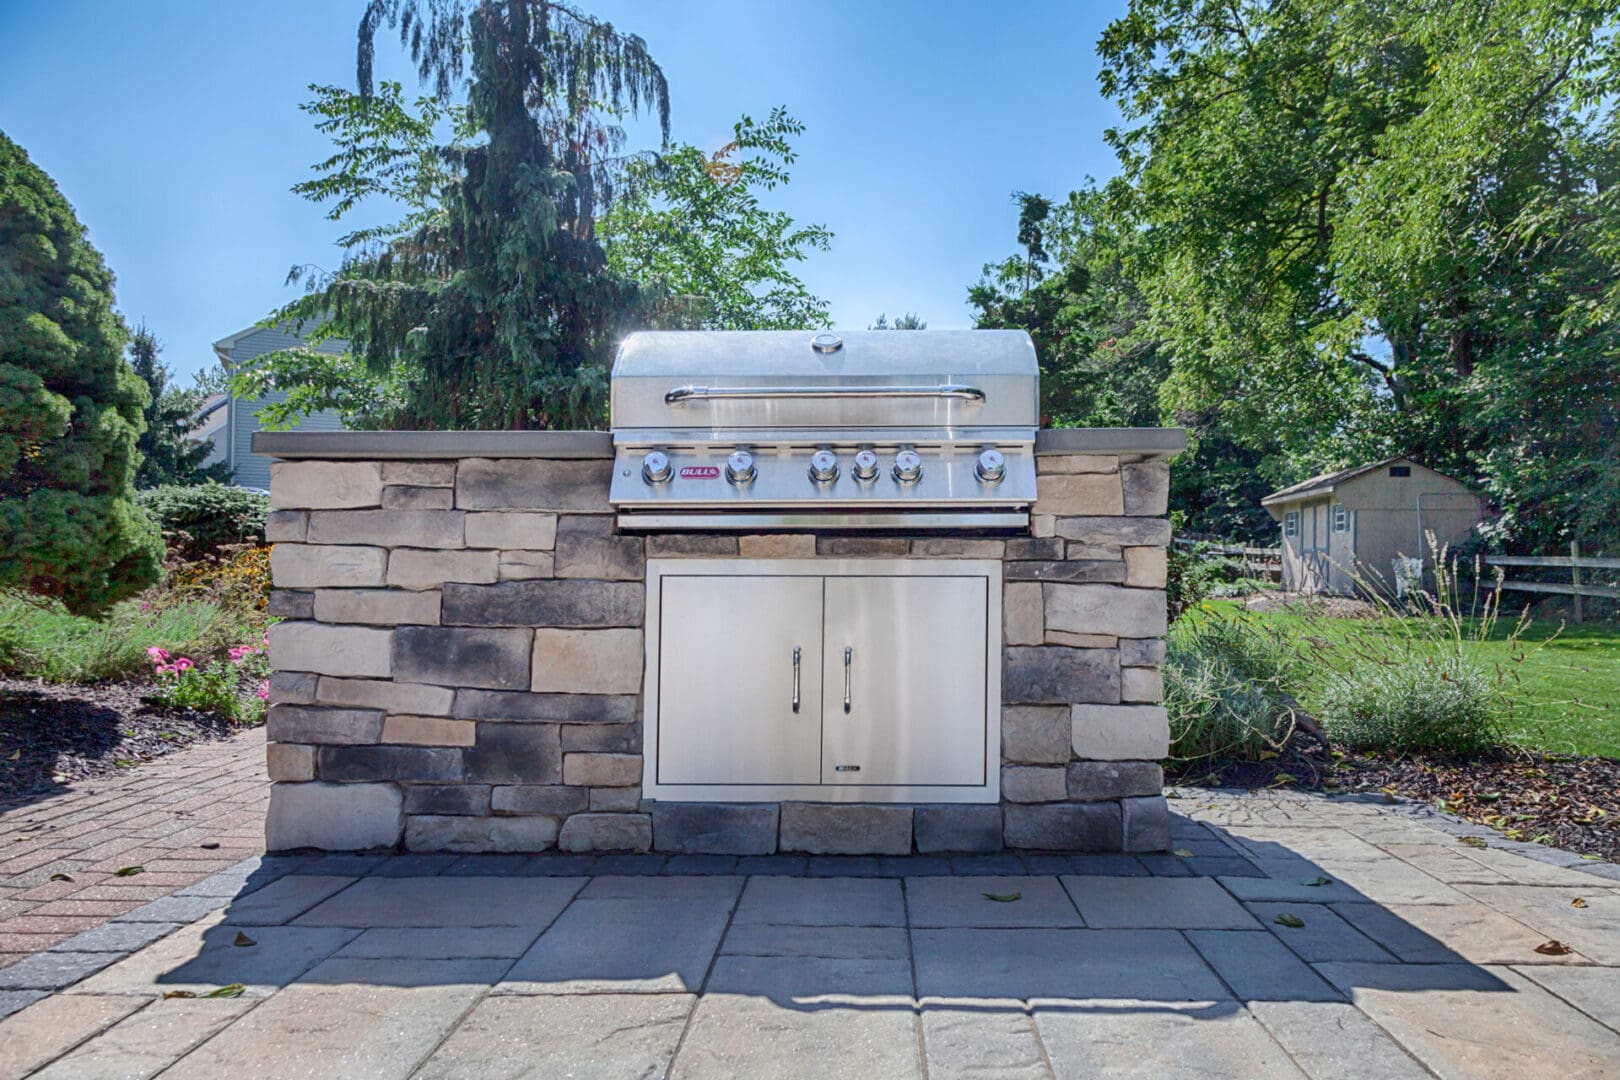 A custom outdoor kitchen featuring a bbq grill on a stone wall in a backyard.